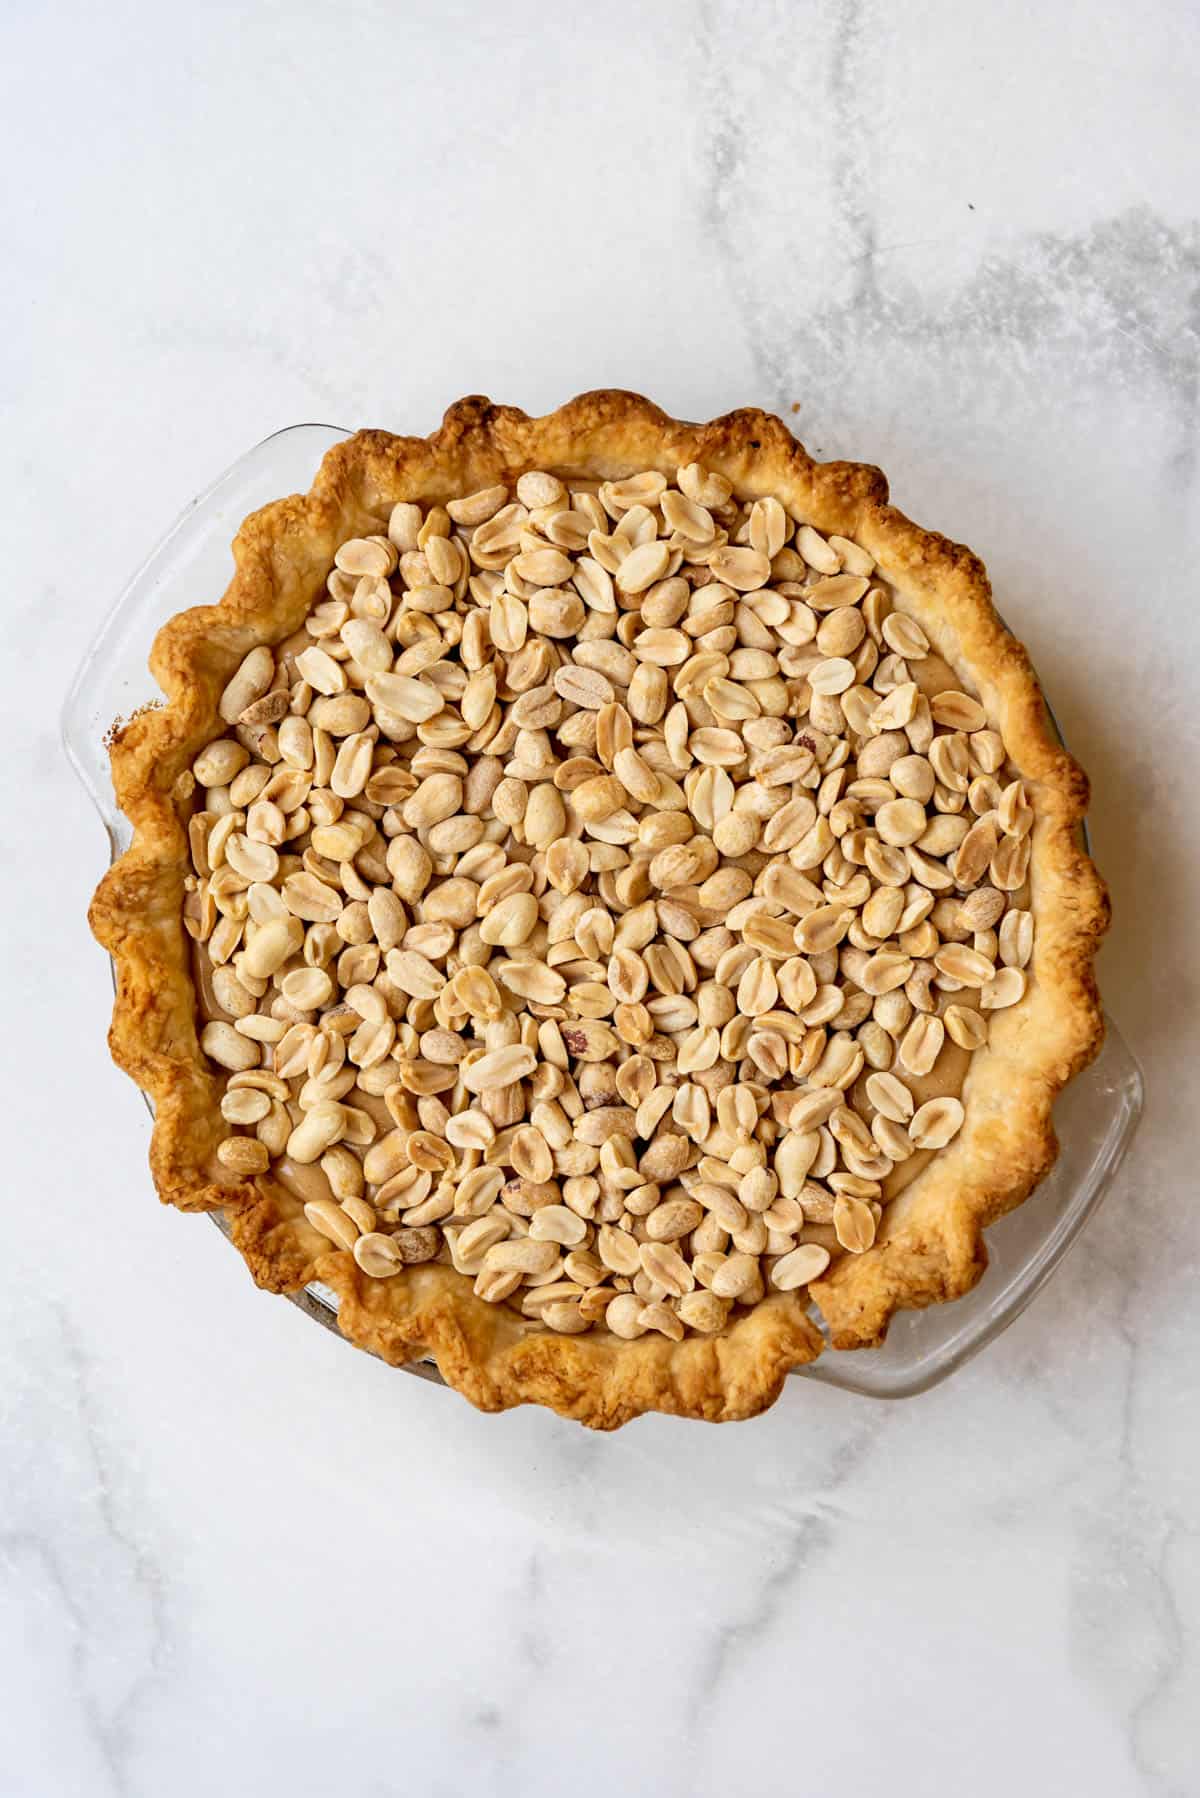 Roasted peanuts in a pie crust with nougat filling.